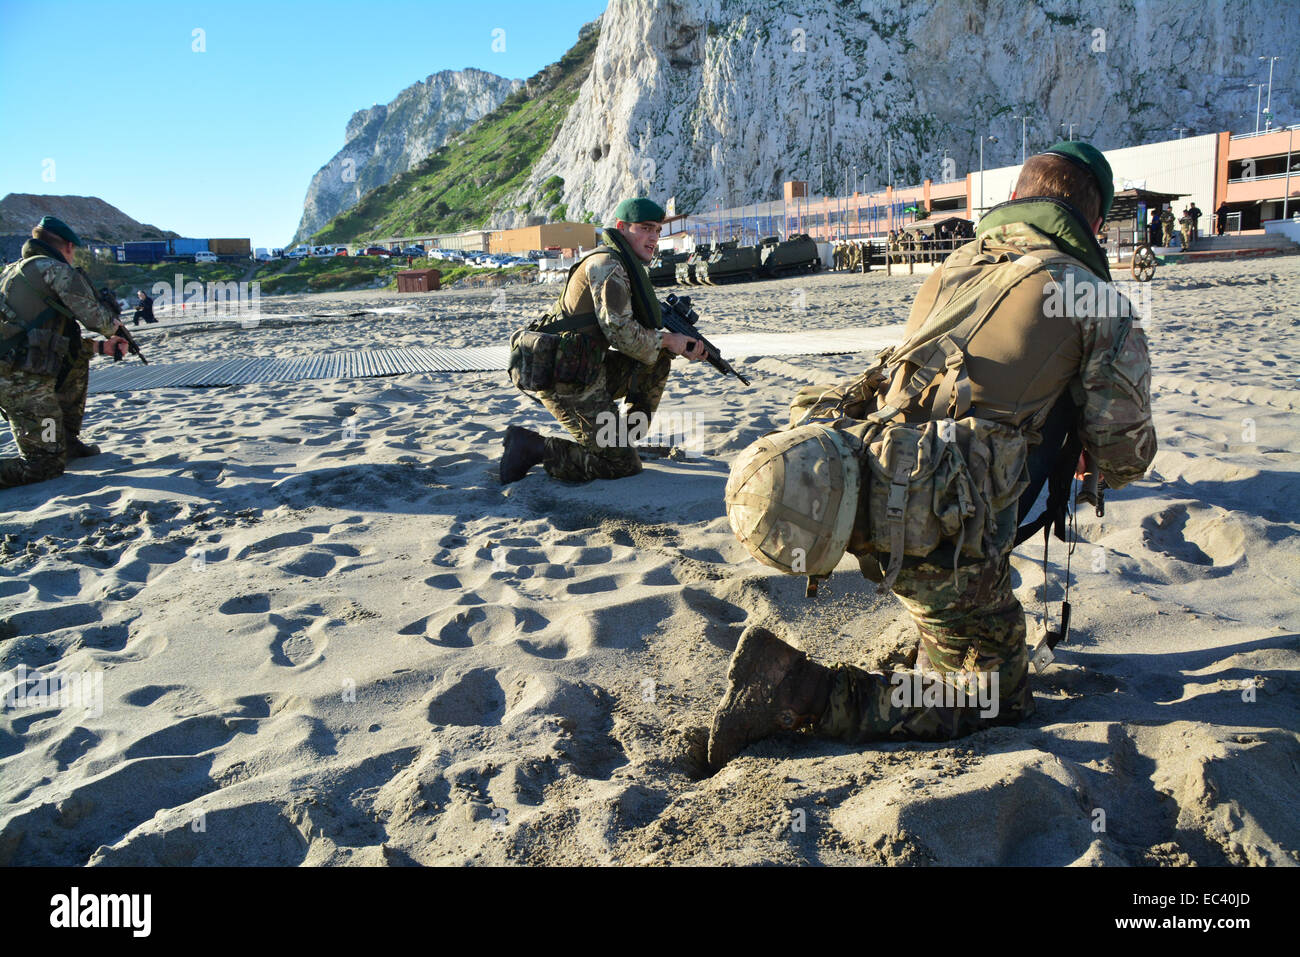 Gibraltar. 9th December, 2014. The Royal Navy and Royal Marines conducted a full amphibious landing exercise at Eastern Beach in Gibraltar. The exercise support by the Royal Navy Flagship HMS Bulwark saw the Commandos from Charlie Company, 40 Commando Royal Marines and four Assault Squadron Royal Marines (ASRM) tests their skillsfor amphibious operations and use of specialist landing and offshore raiding craft, capable of carrying Royal Marines Commandos, heavy vehicles, tanks, as well as stores and supplies. Credit:  Stephen Ignacio/Alamy Live News Stock Photo